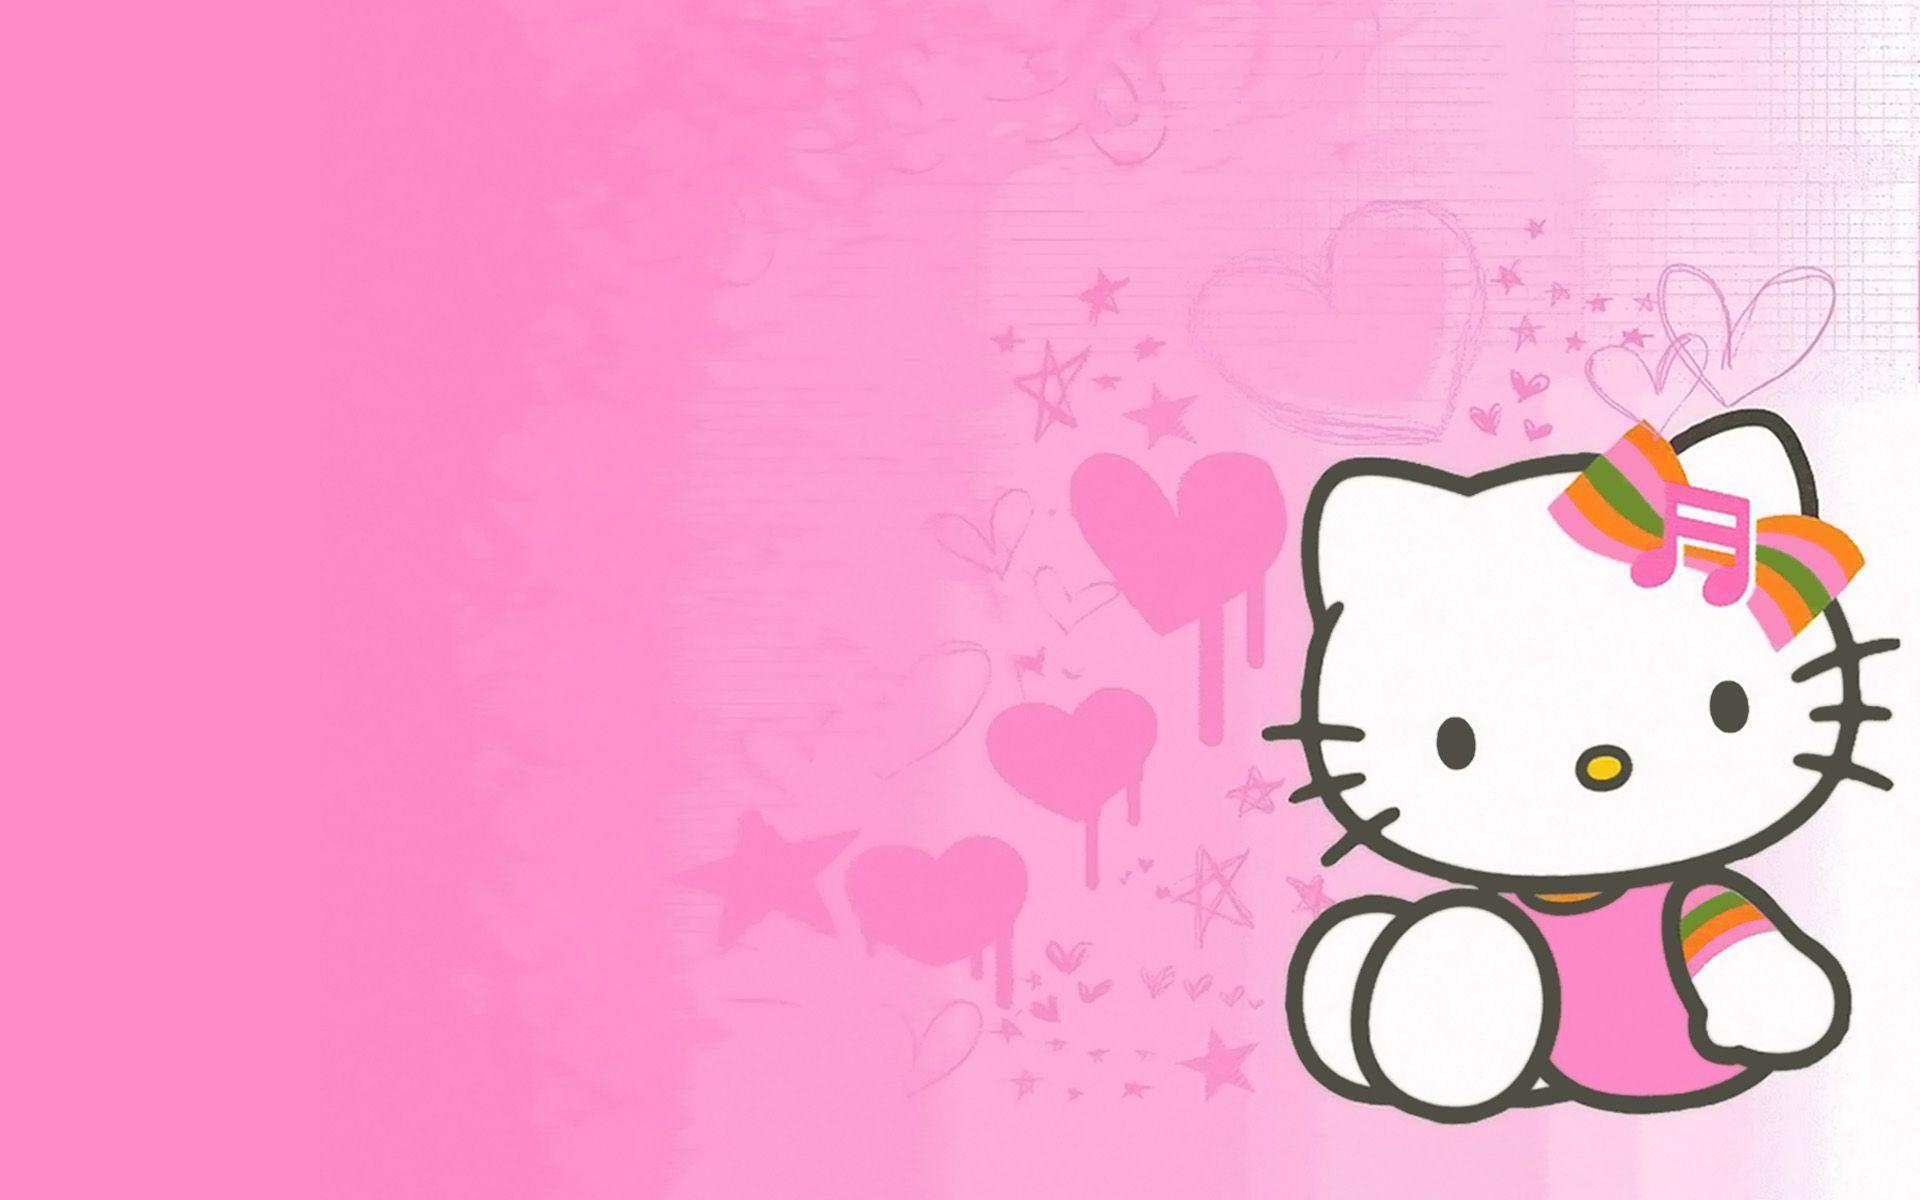 Cute Anime Hello Kitty Image HD Wallpapers Cute Wallpapers